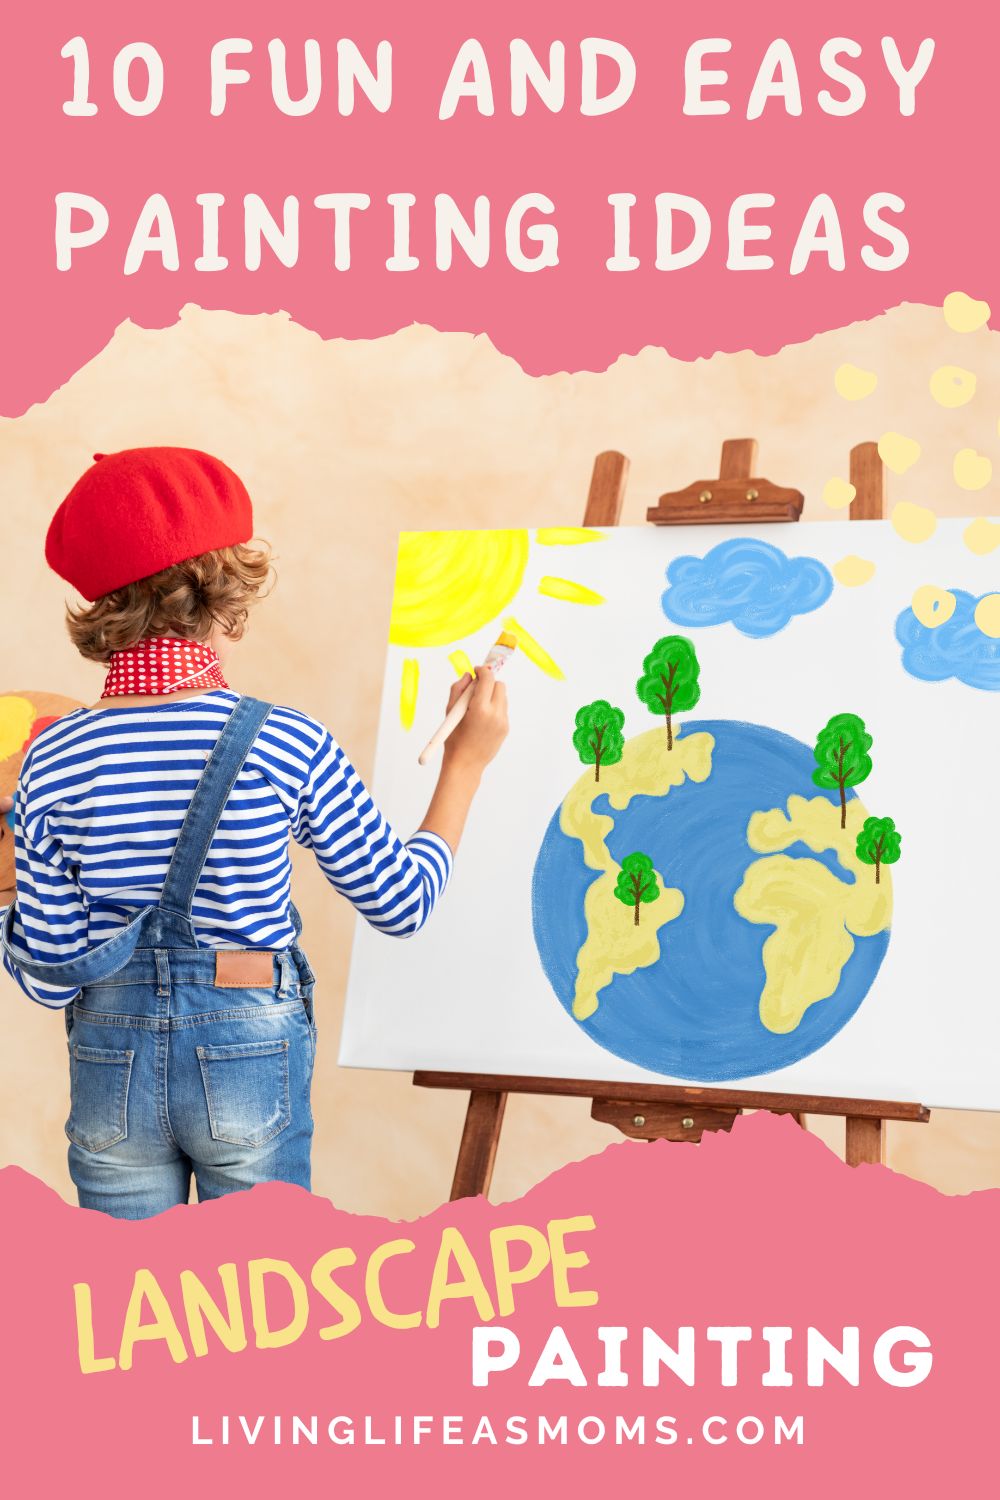 landscape painting ideas for kids are fun and easy with this short guide